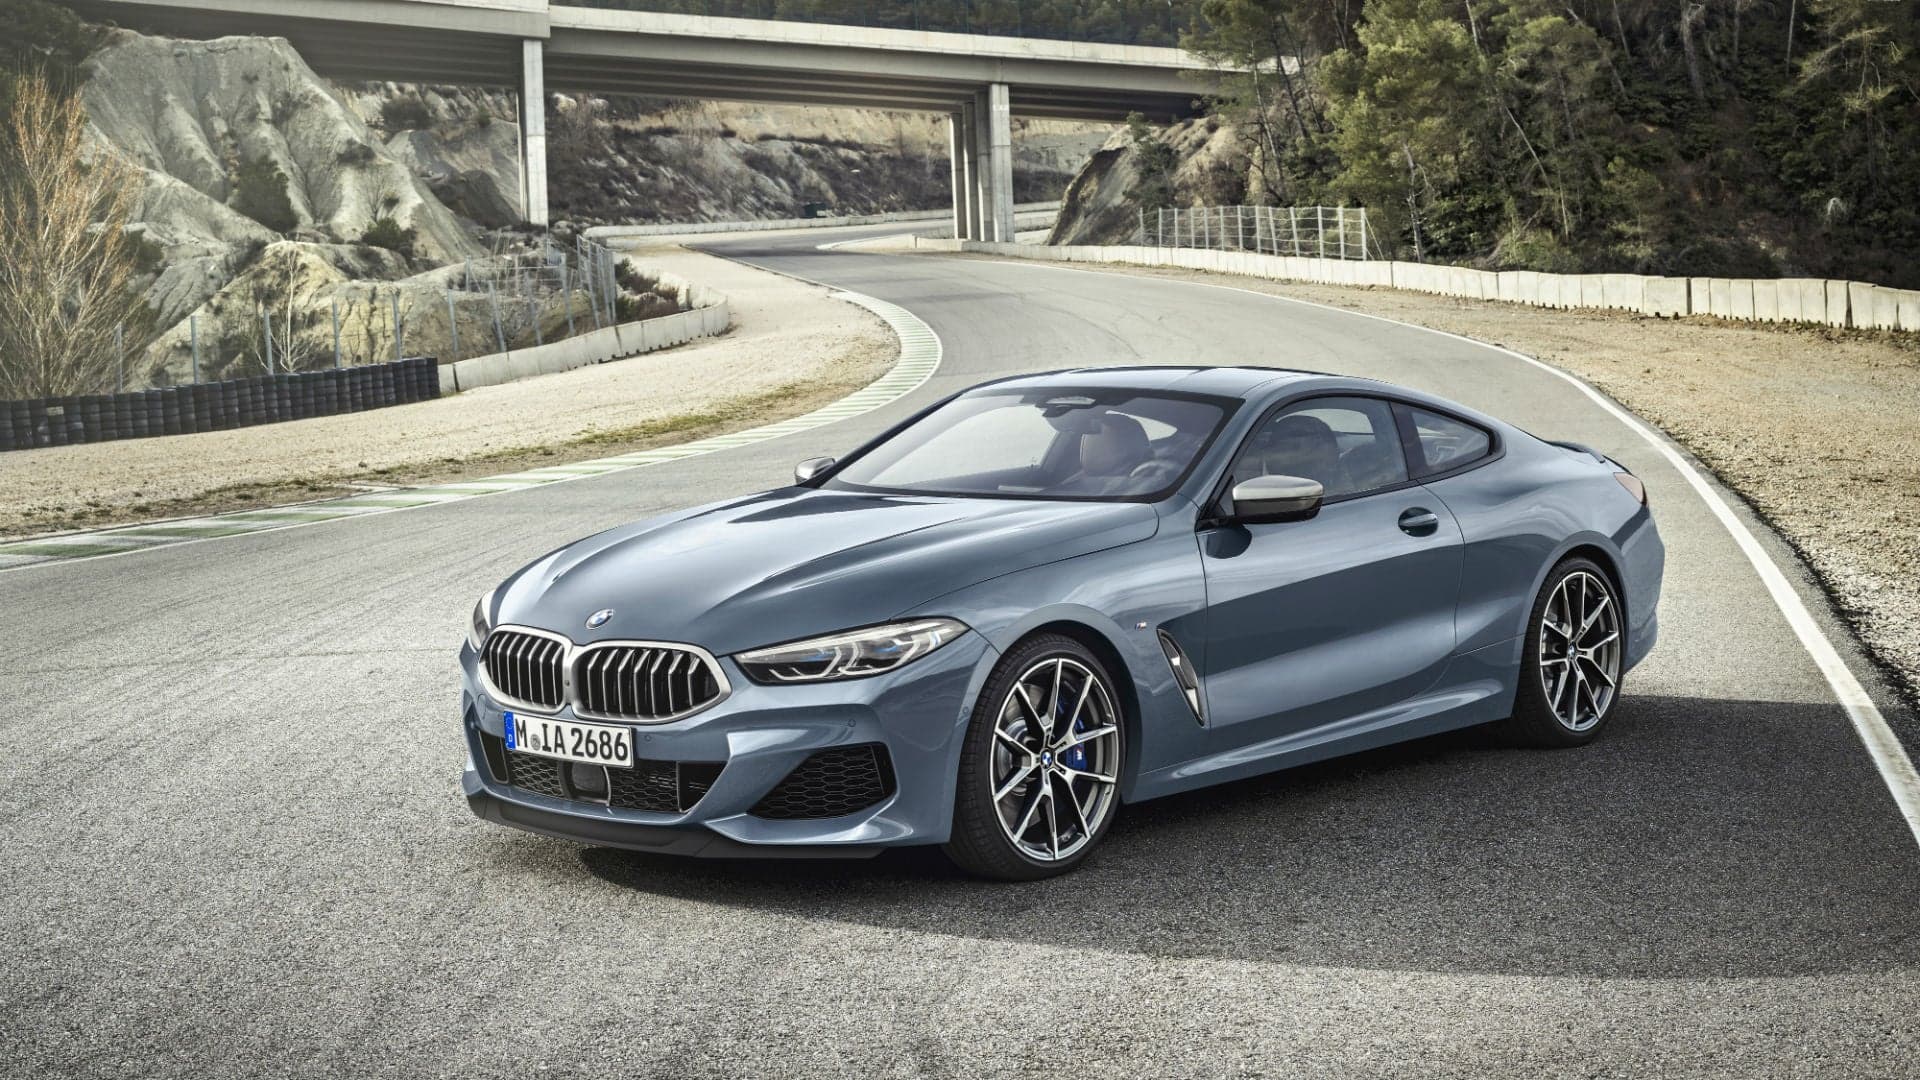 2019 BMW 8 Series Coupe: One Luxury Super Coupe to Rule Them All